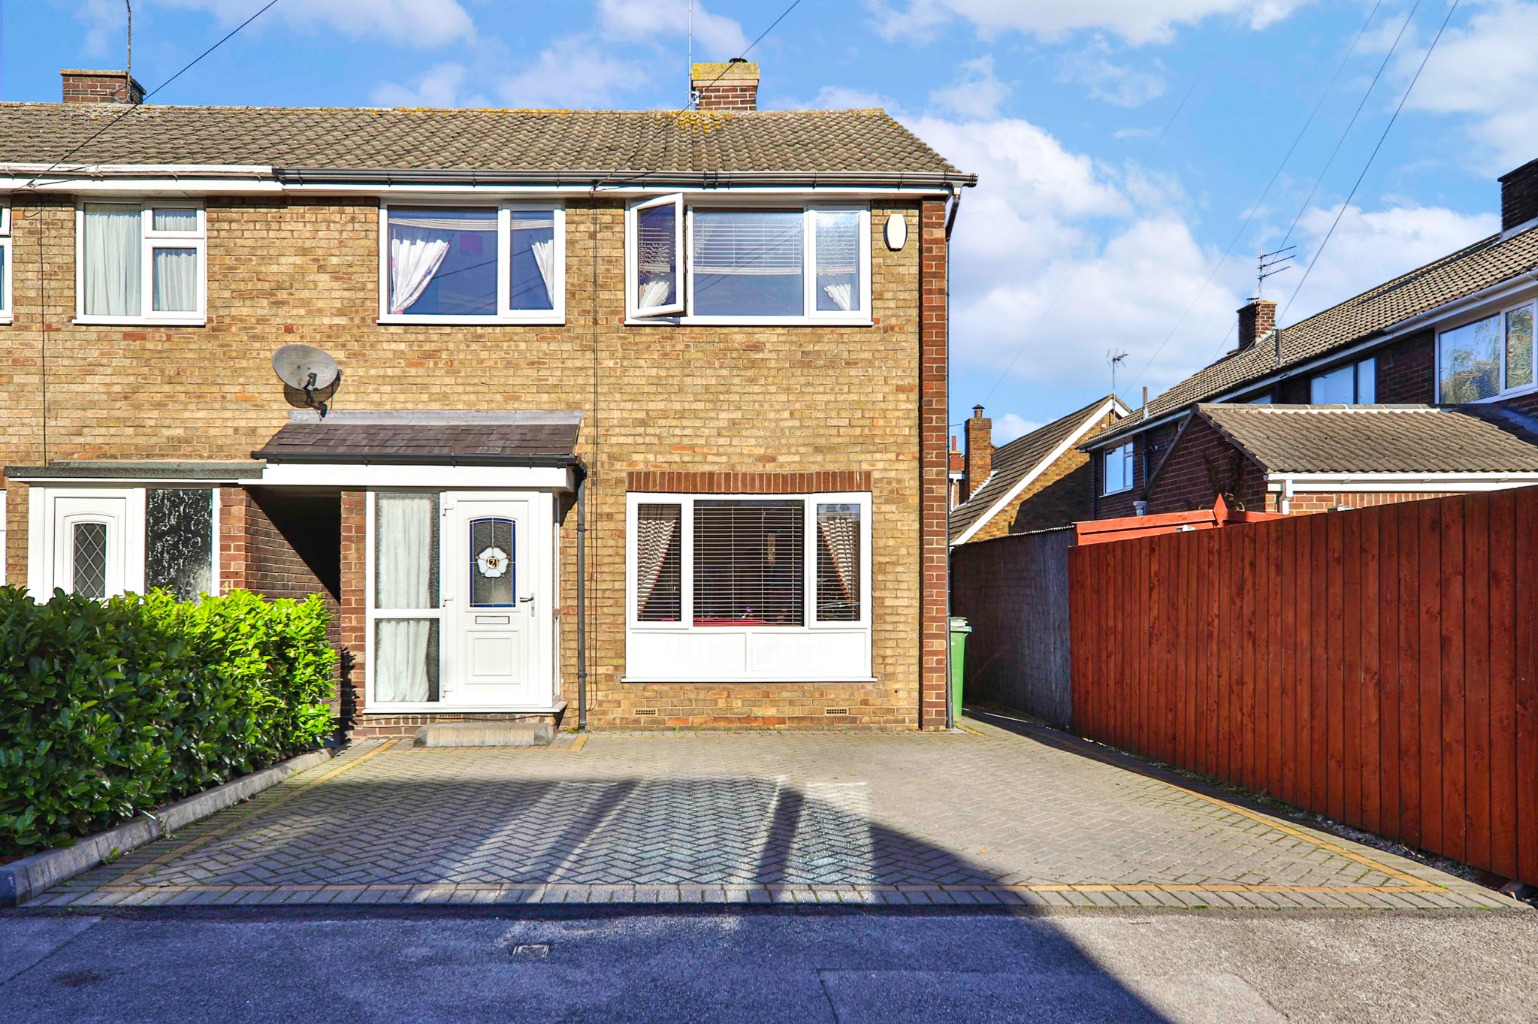 3 bed end of terrace house for sale in Plantation Close, Beverley, HU17